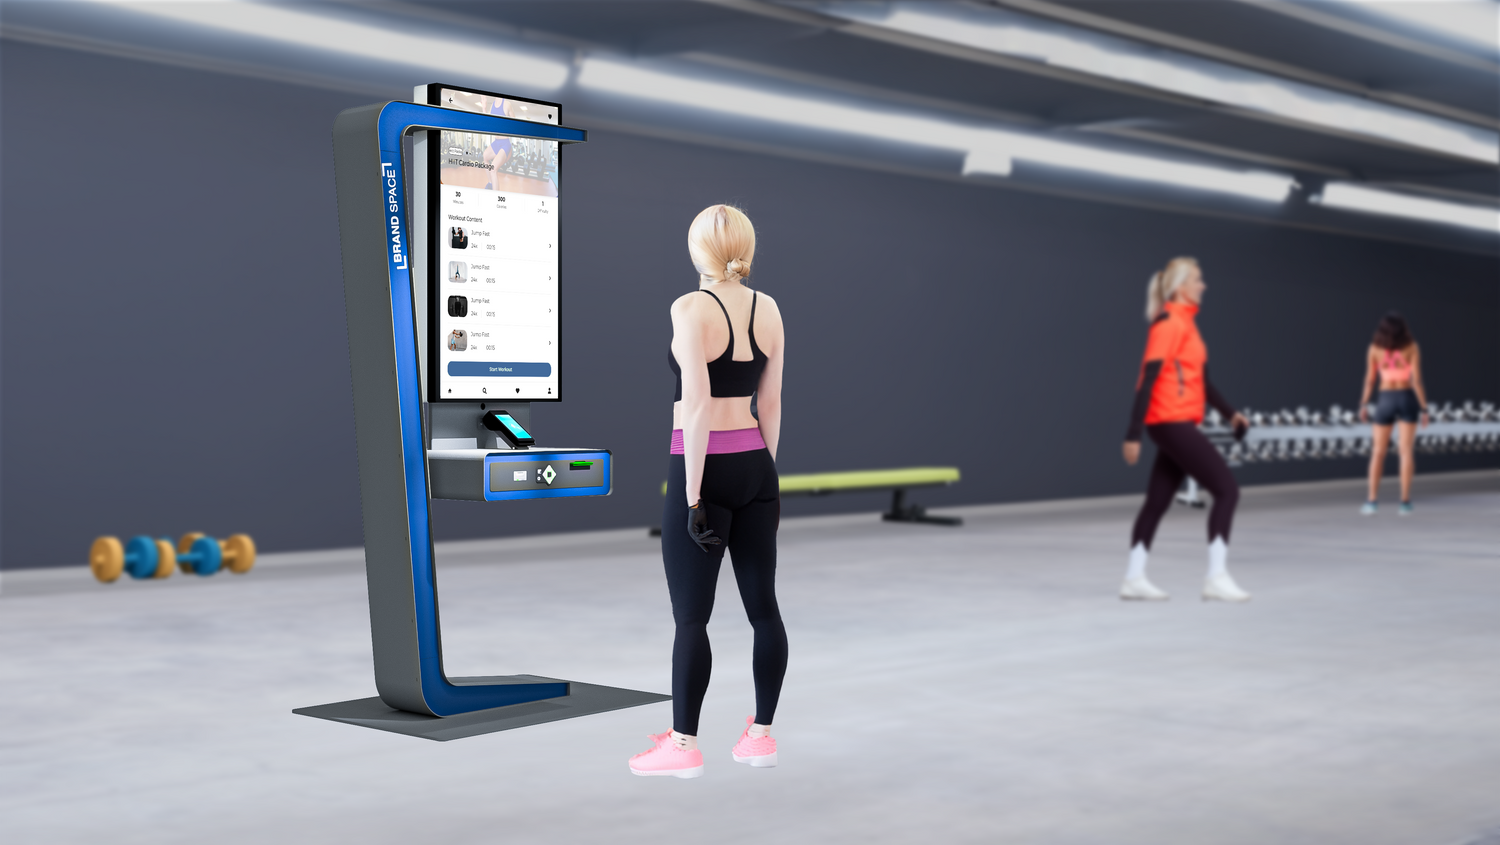 State-Of-The-Art Kiosks Bring Out The Best for Gyms